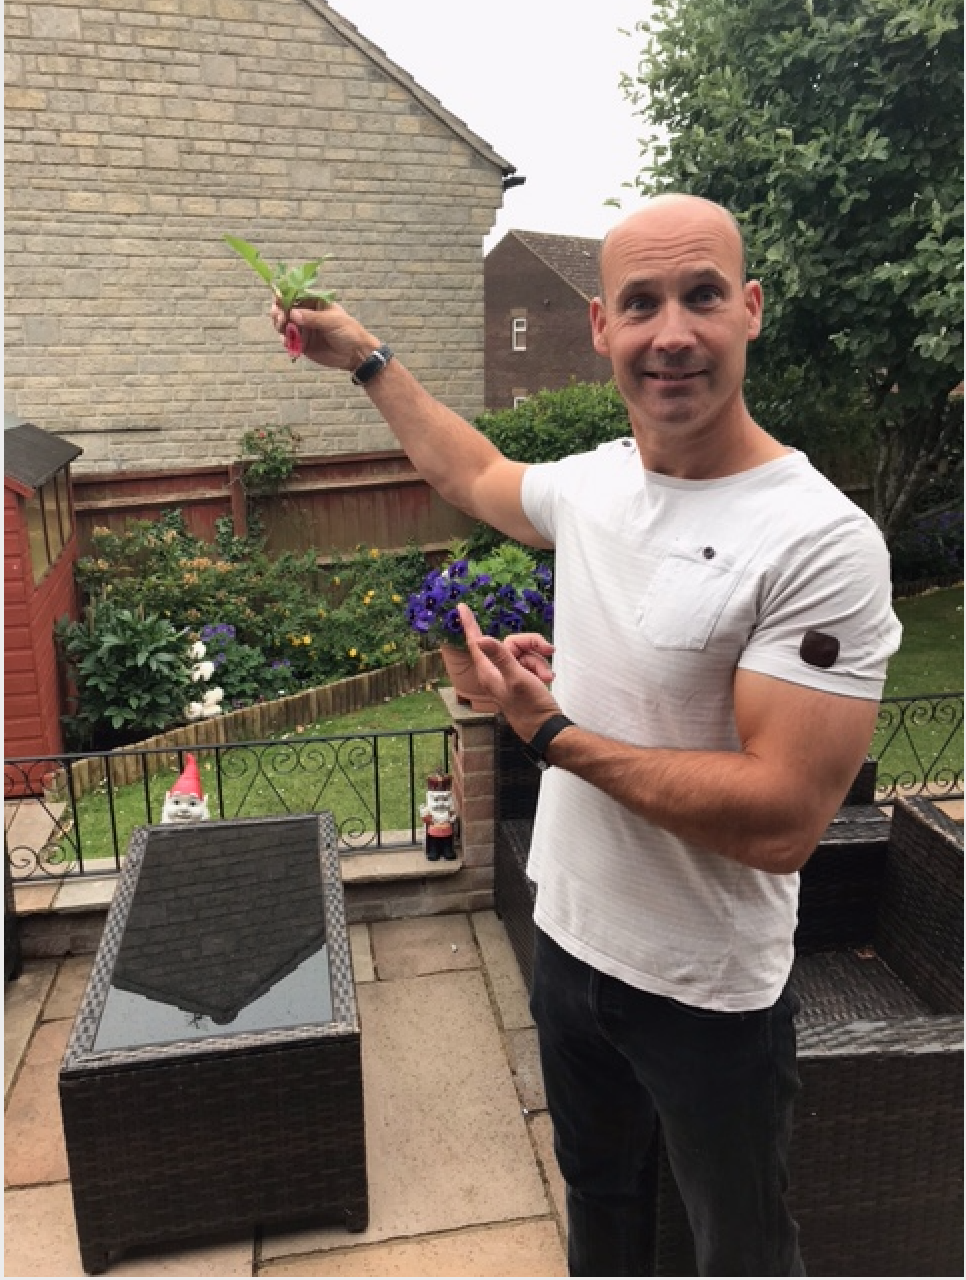 Above: Derren last summer during lockdown when he tried growing veg. This one is one of him looking particularly ‘Raddishing’.